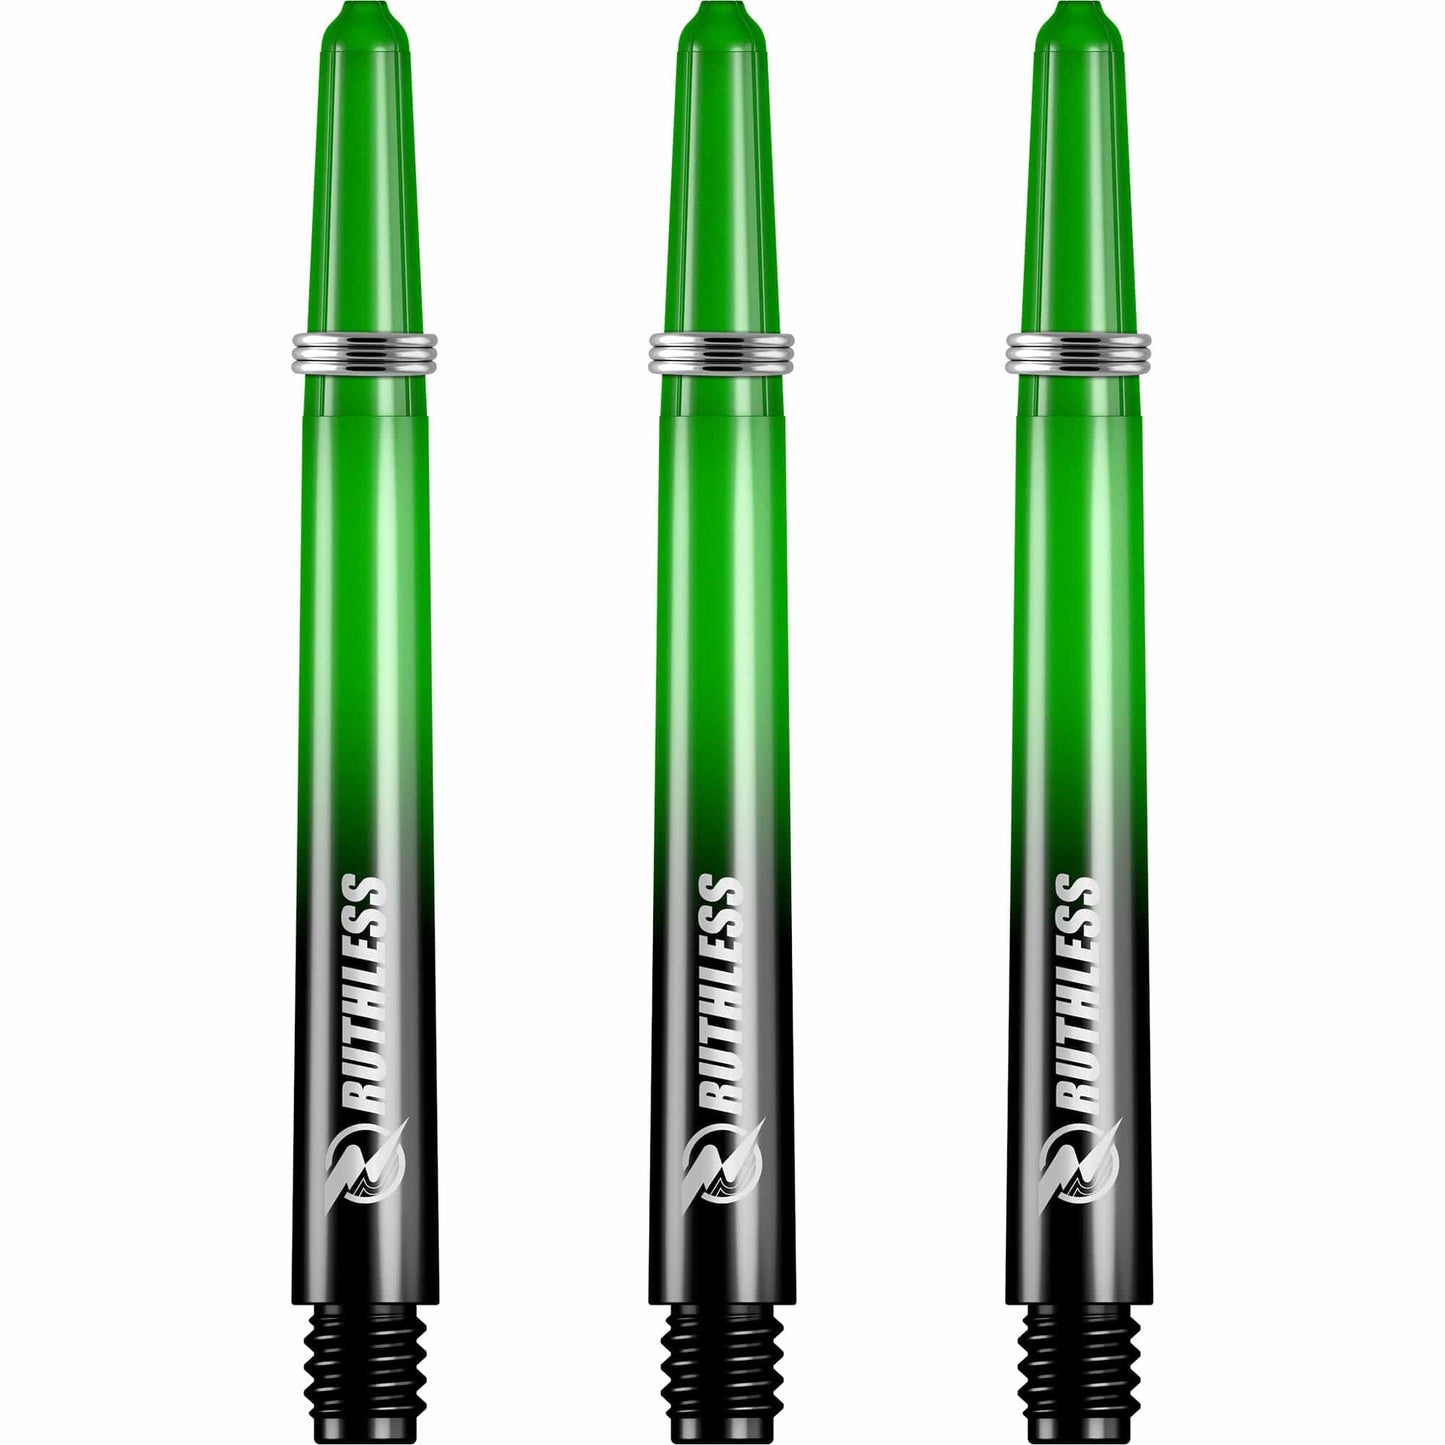 Ruthless Deflectagrip Plus Dart Shafts - Polycarbonate Stems with Springs - Green Medium